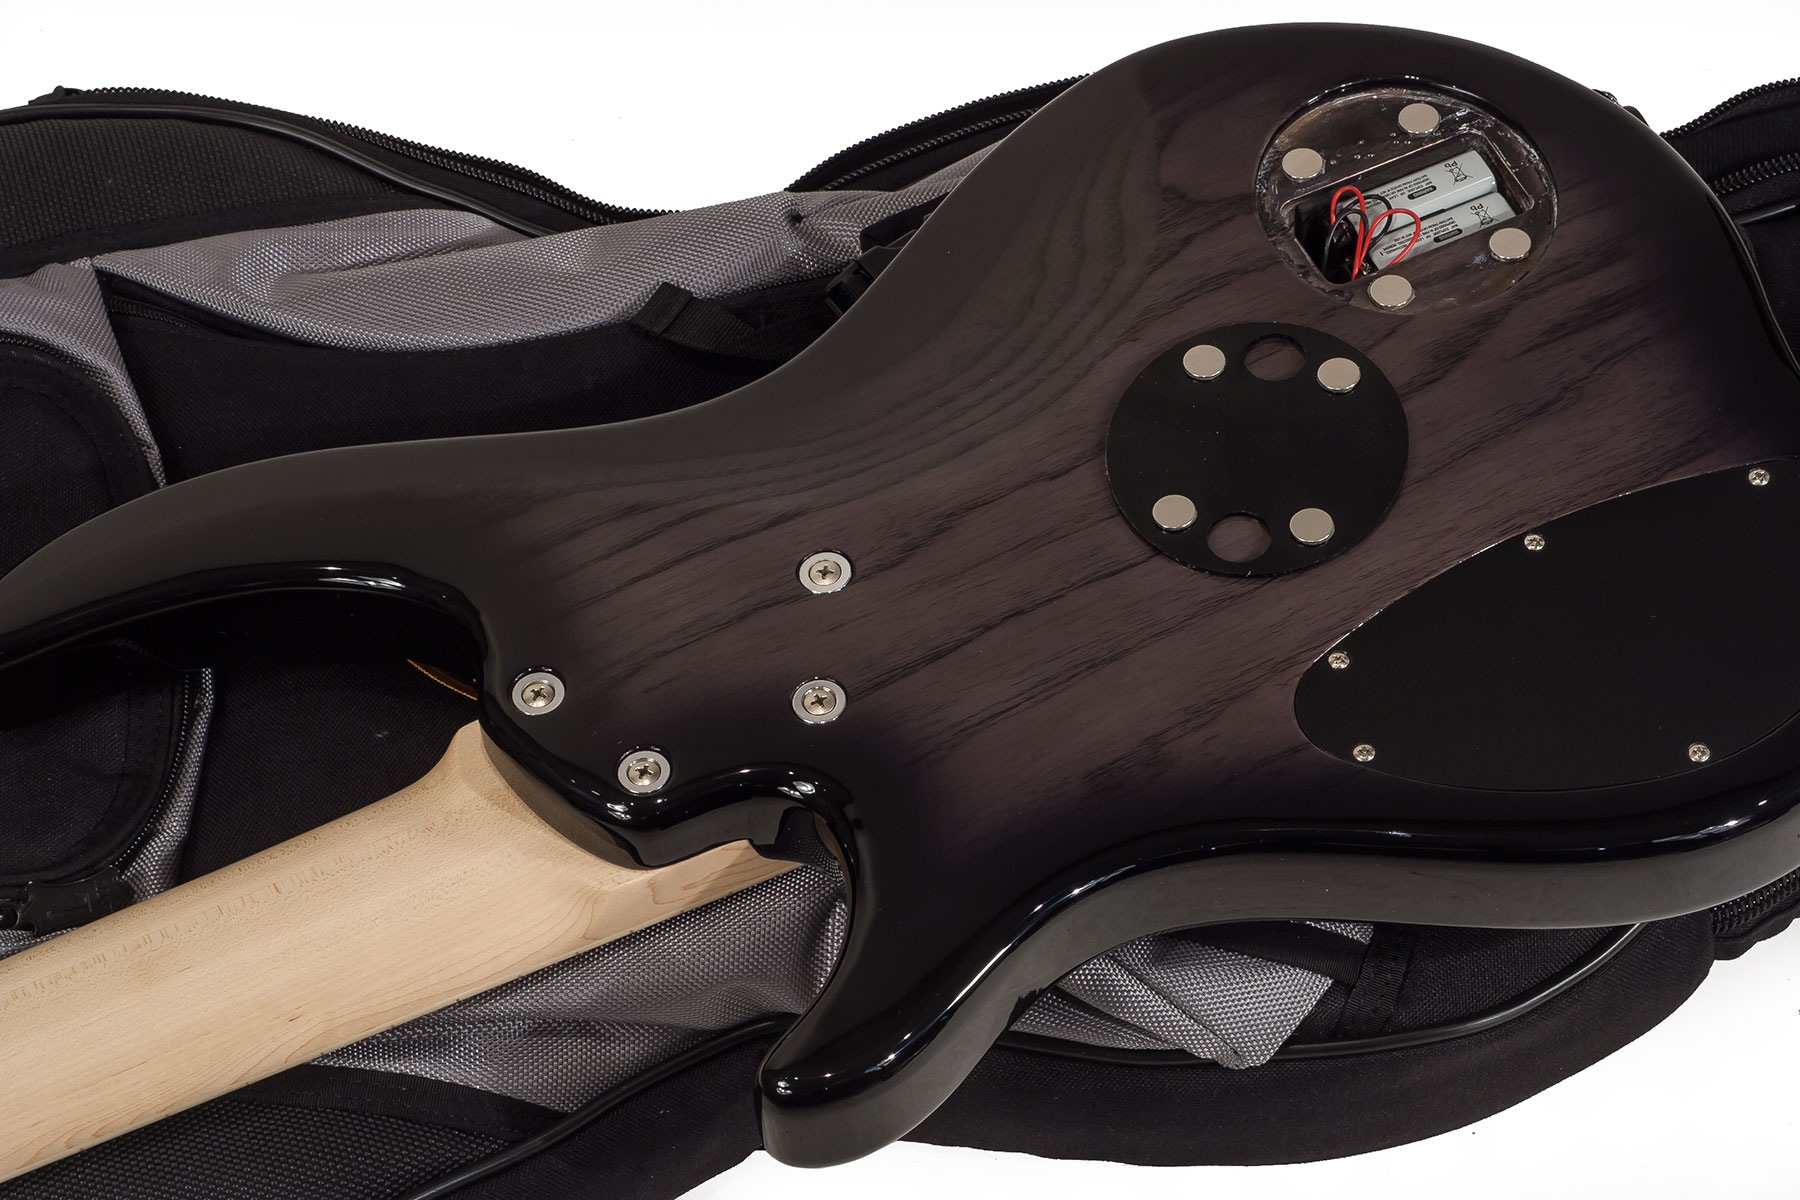 Dingwall Combustion 5 2-pickups Mn - 2-tone Blackburst - Solid body electric bass - Variation 3